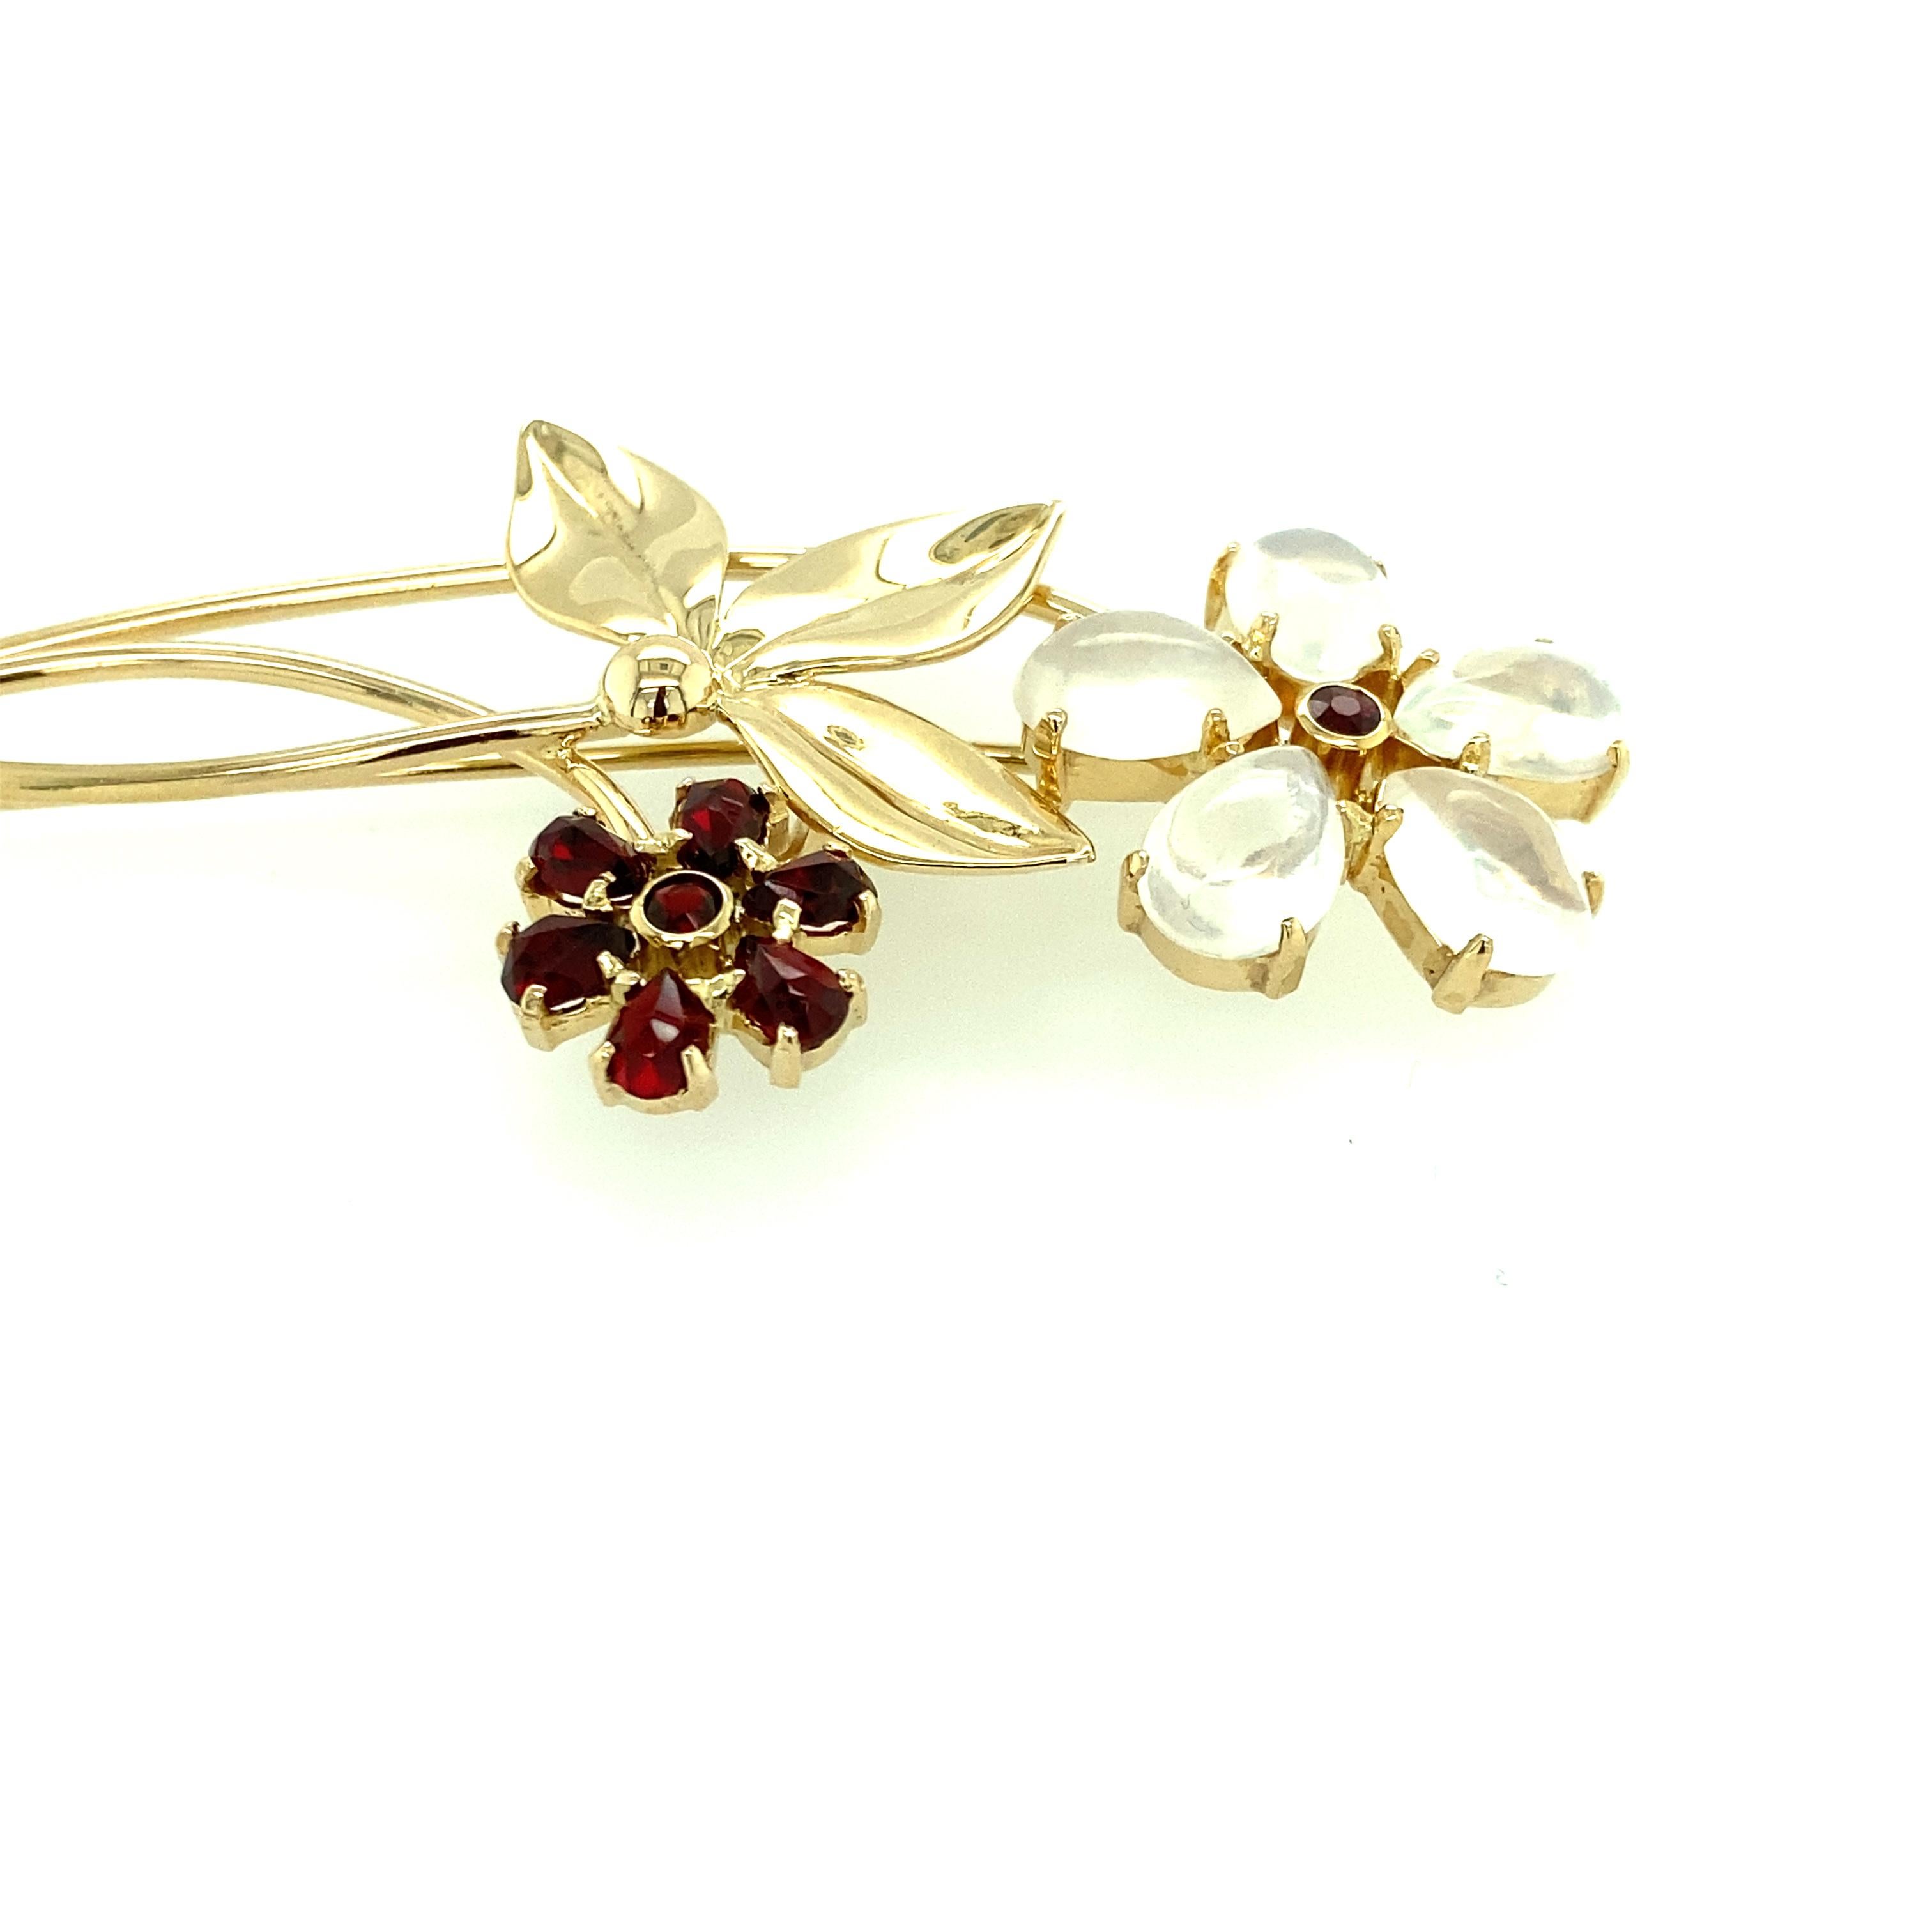 Tiffany & Co. Moonstone and Garnet Flower Pin. 1940s. For Sale 1